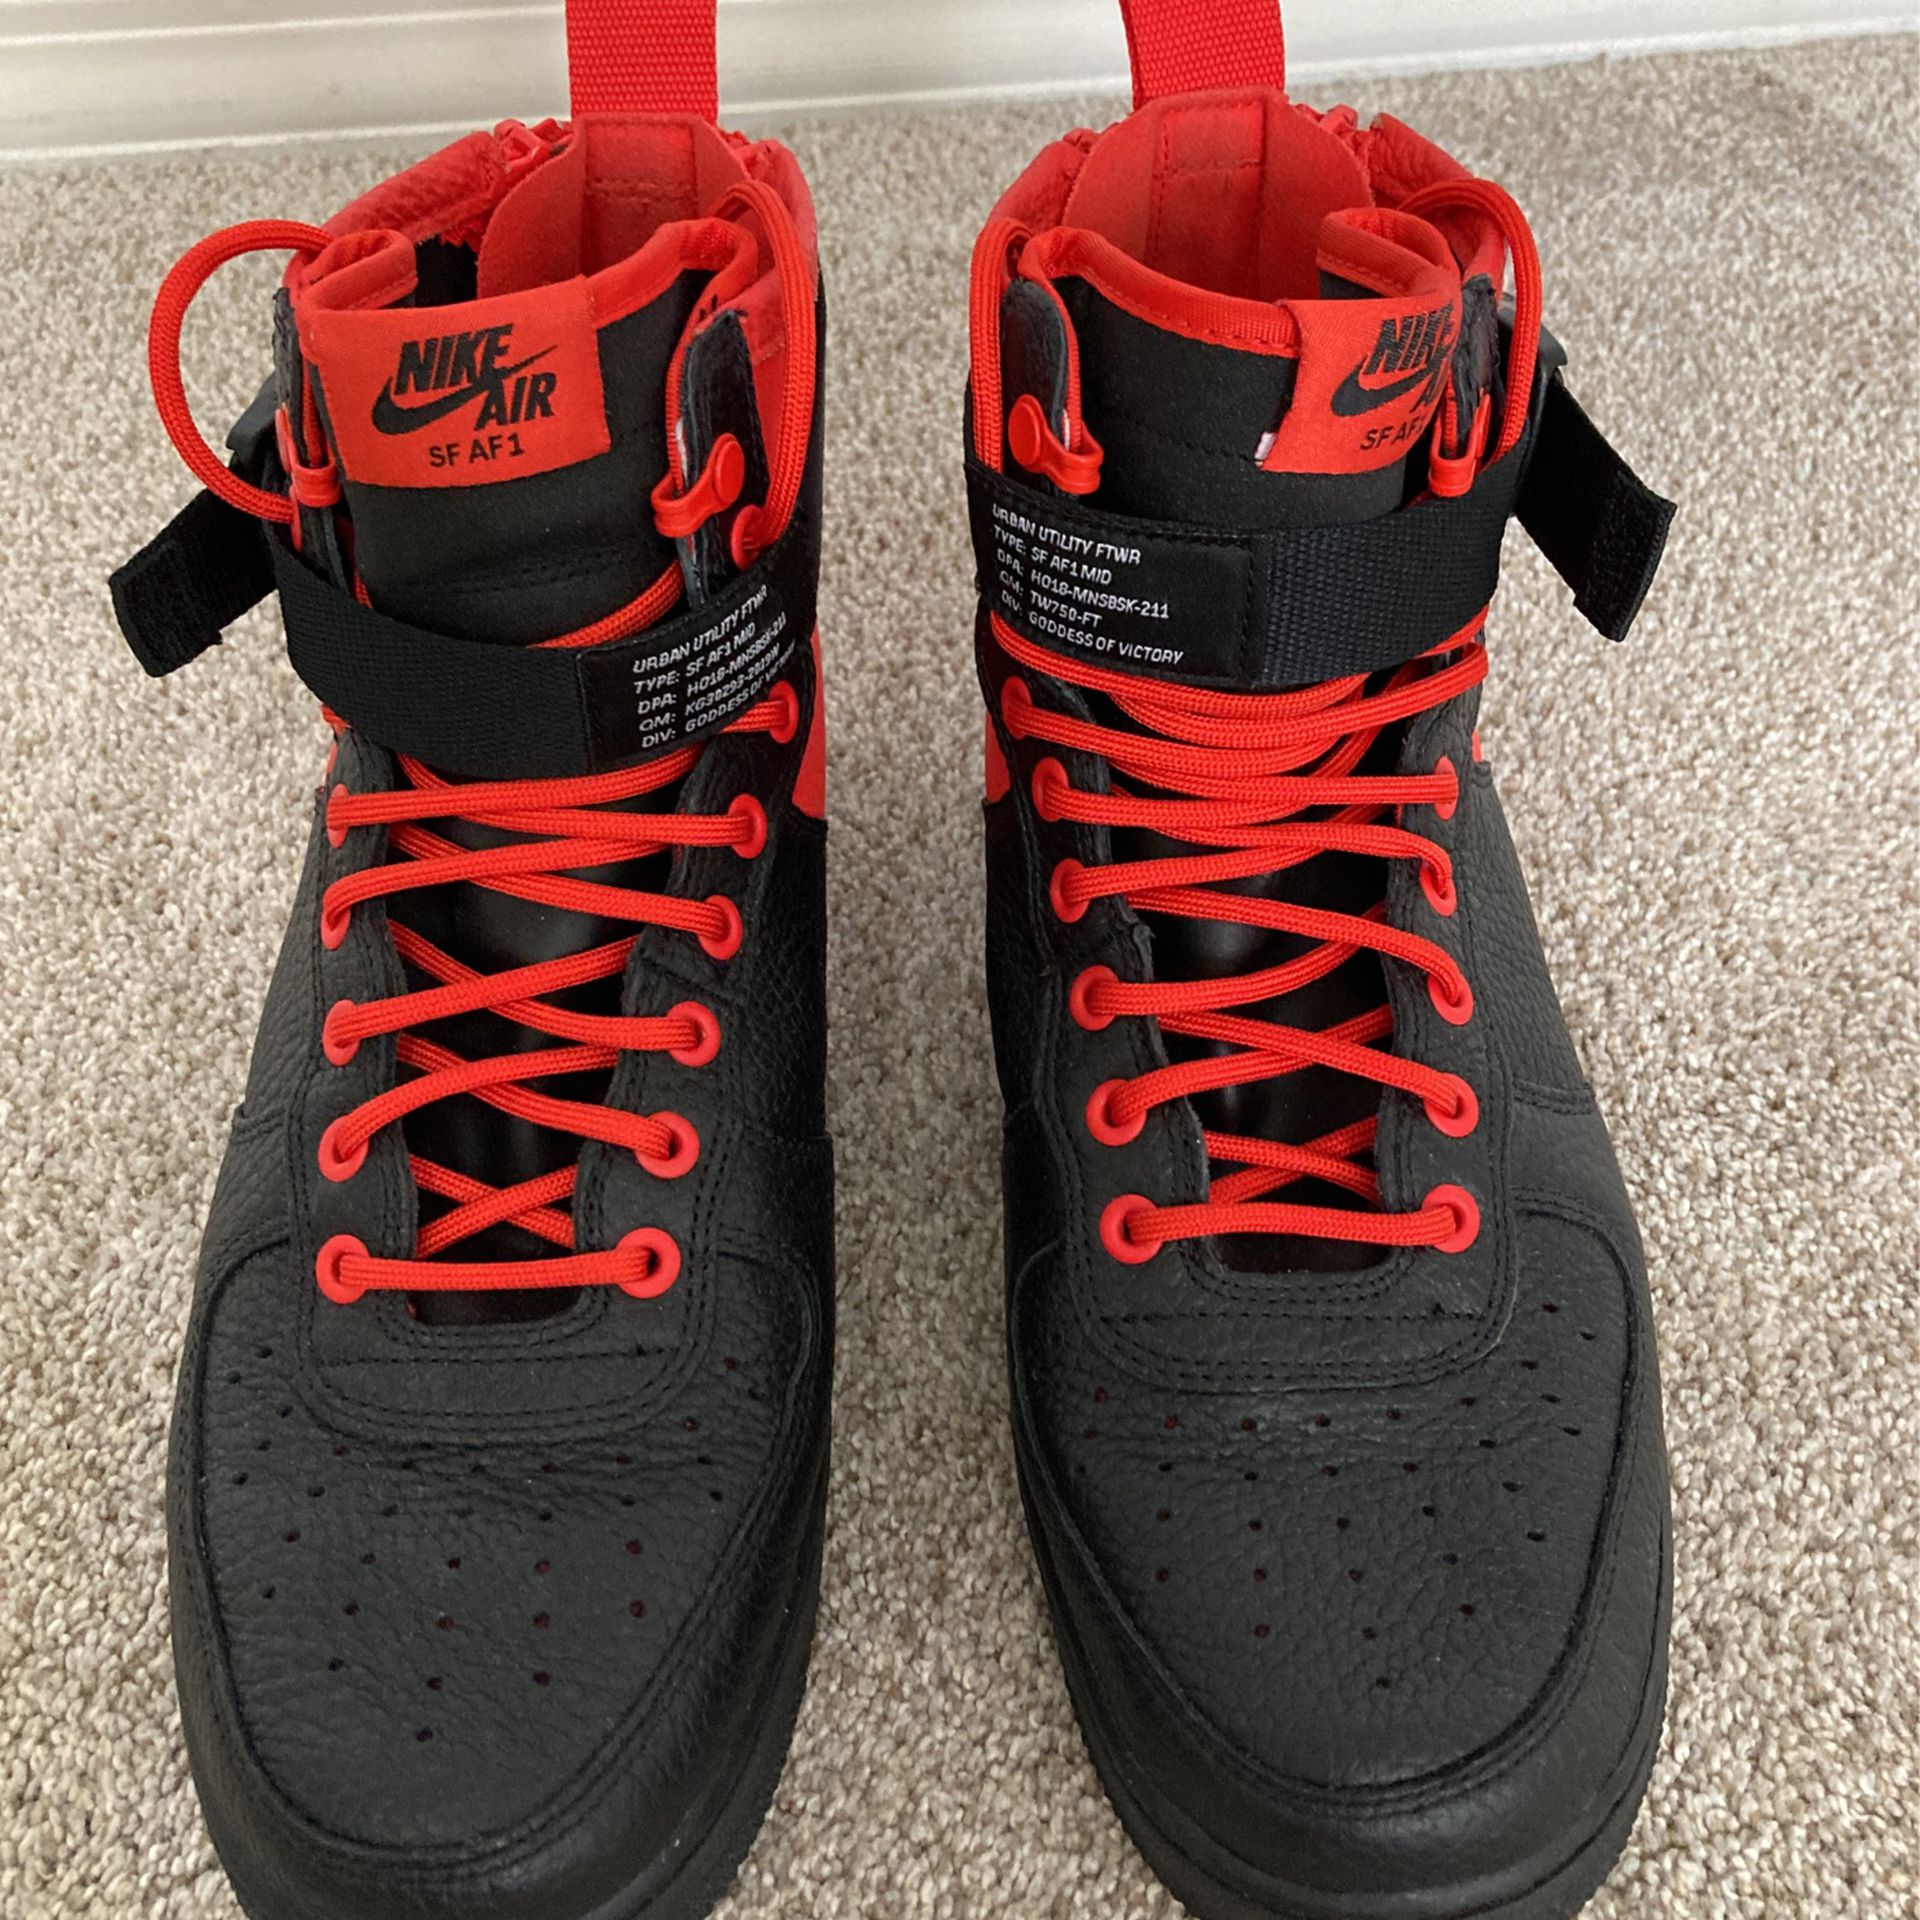 Black Air Force 1 for Sale in Mesa, AZ - OfferUp